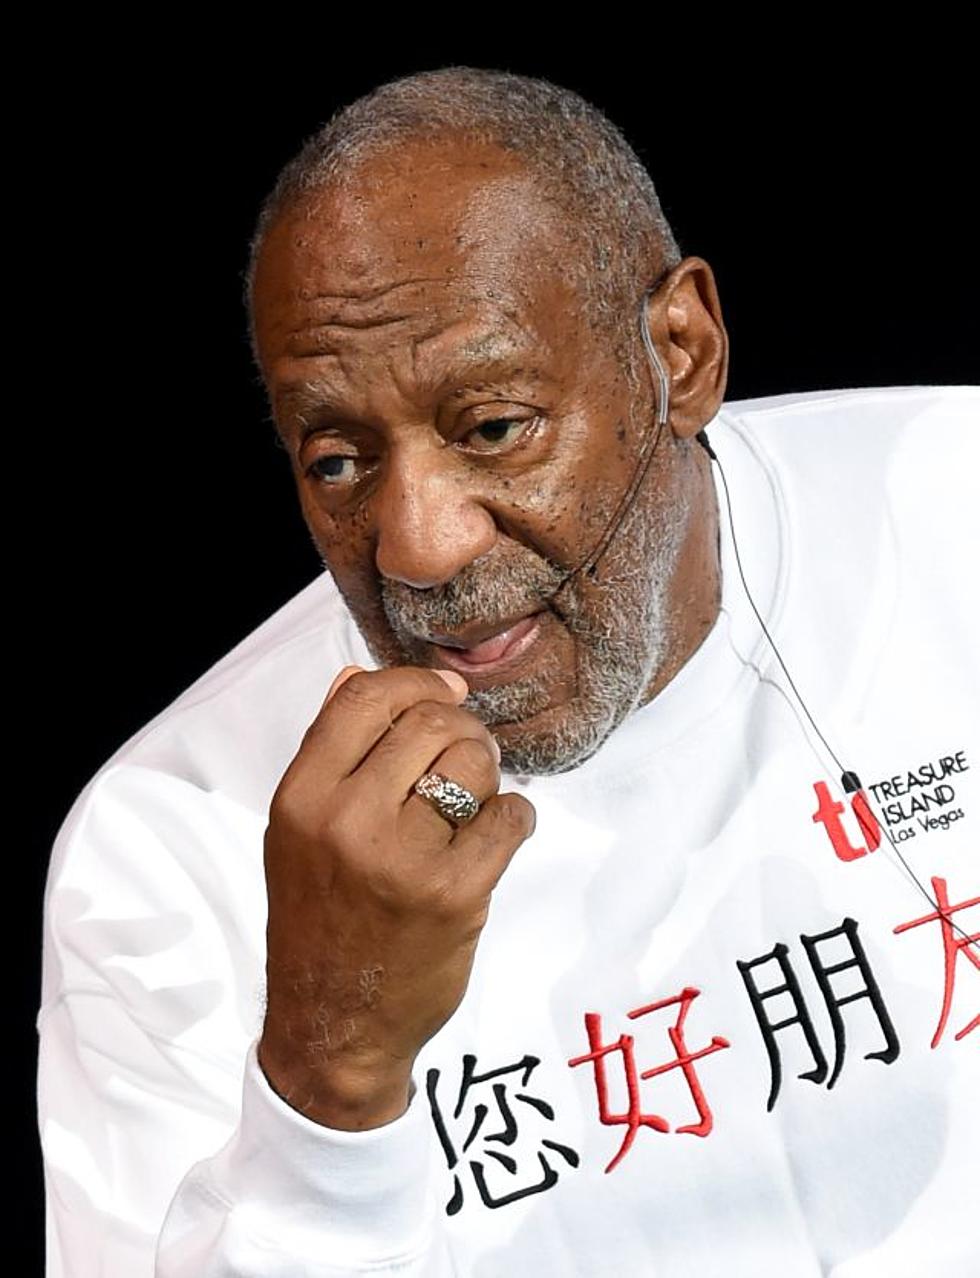 Would You Go See Bill Cosby in Lafayette? [POLL]